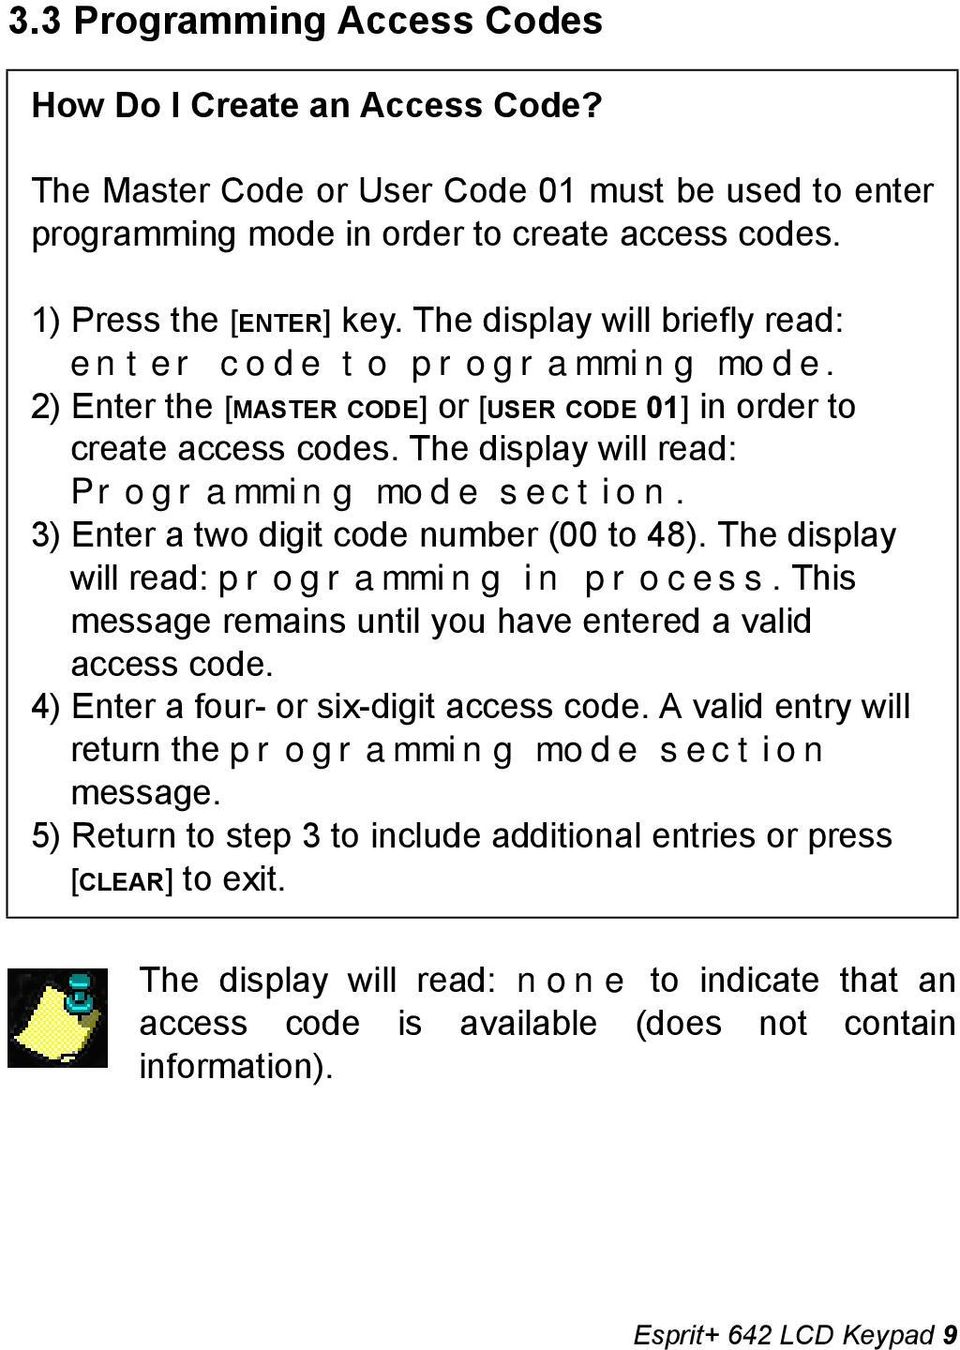 3) Enter a two digit code number (00 to 48). The display will read: programming in process. This message remains until you have entered a valid access code. 4) Enter a four- or six-digit access code.